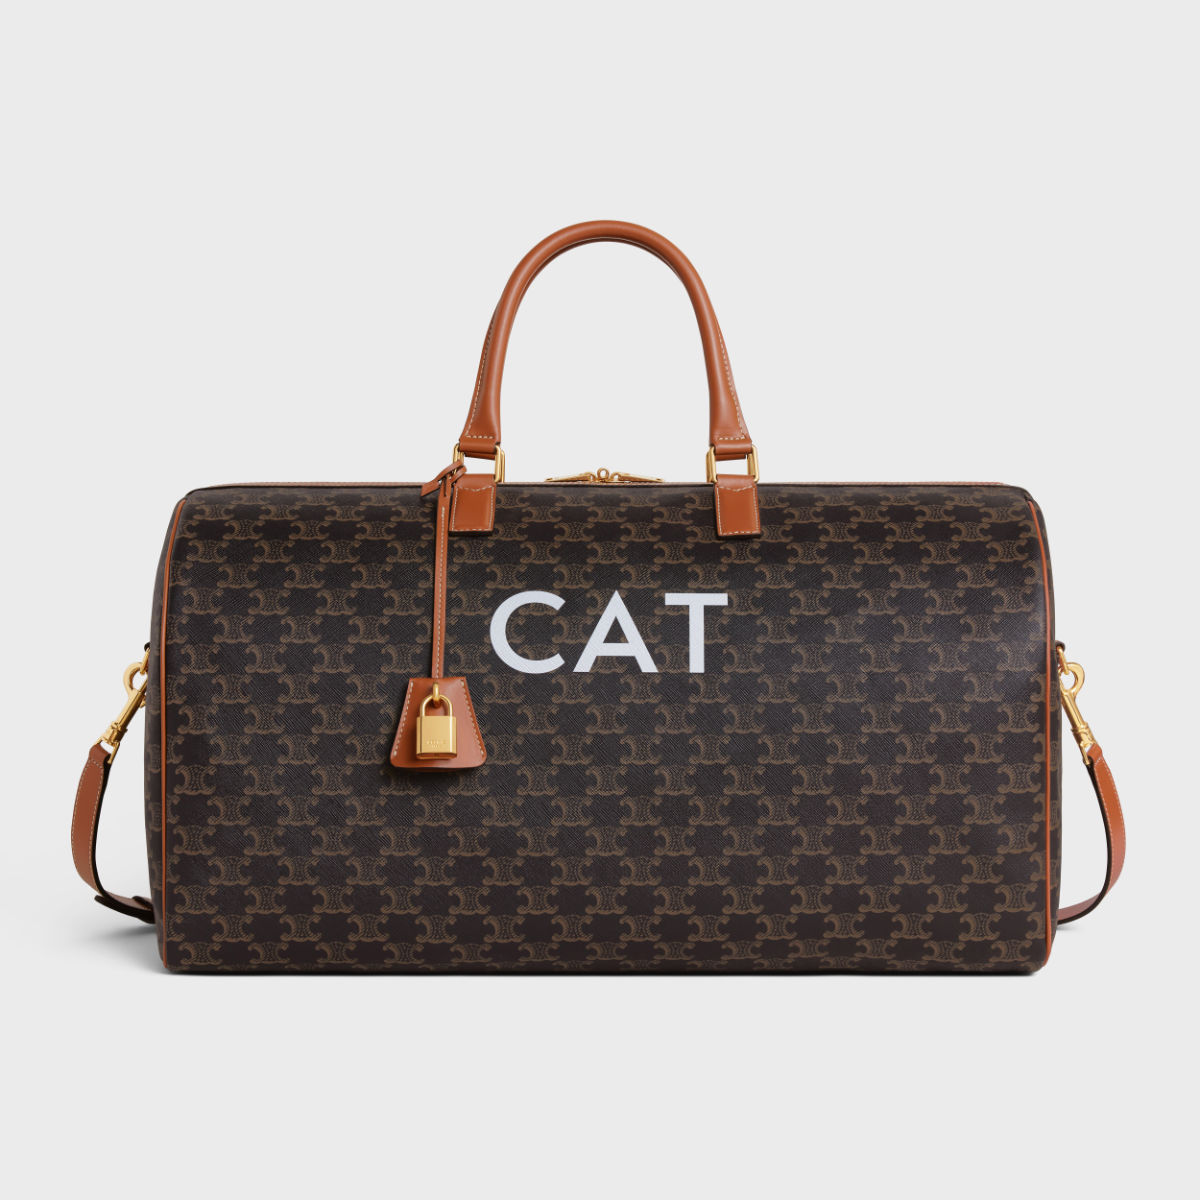 MAISON CELINE Presents Its New Dog And Cat Accessories